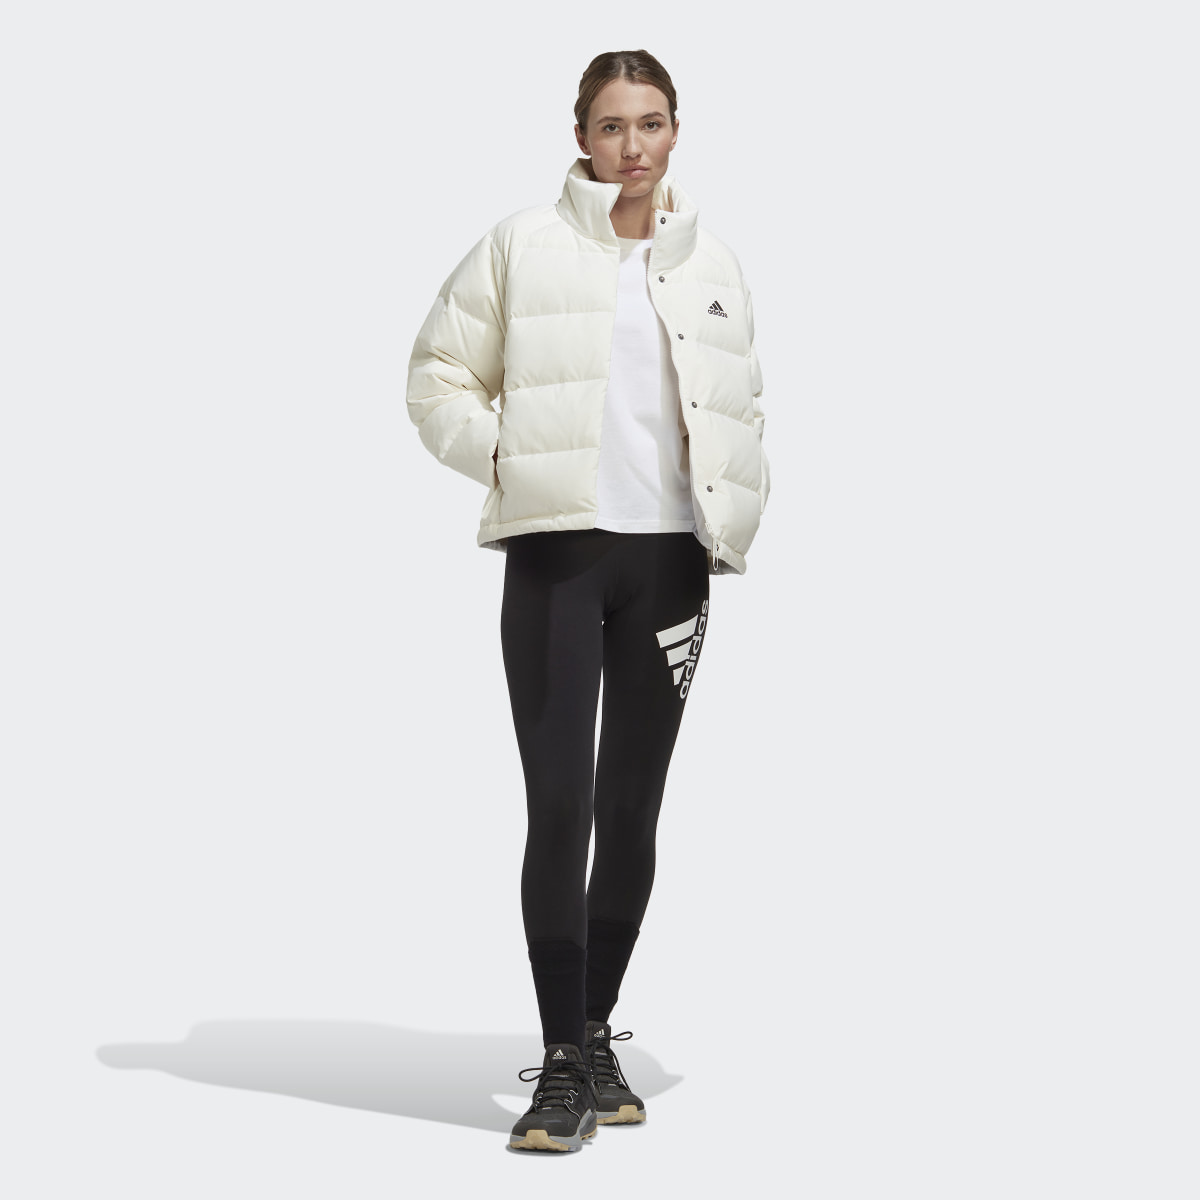 Adidas Helionic Relaxed Down Jacket. 6